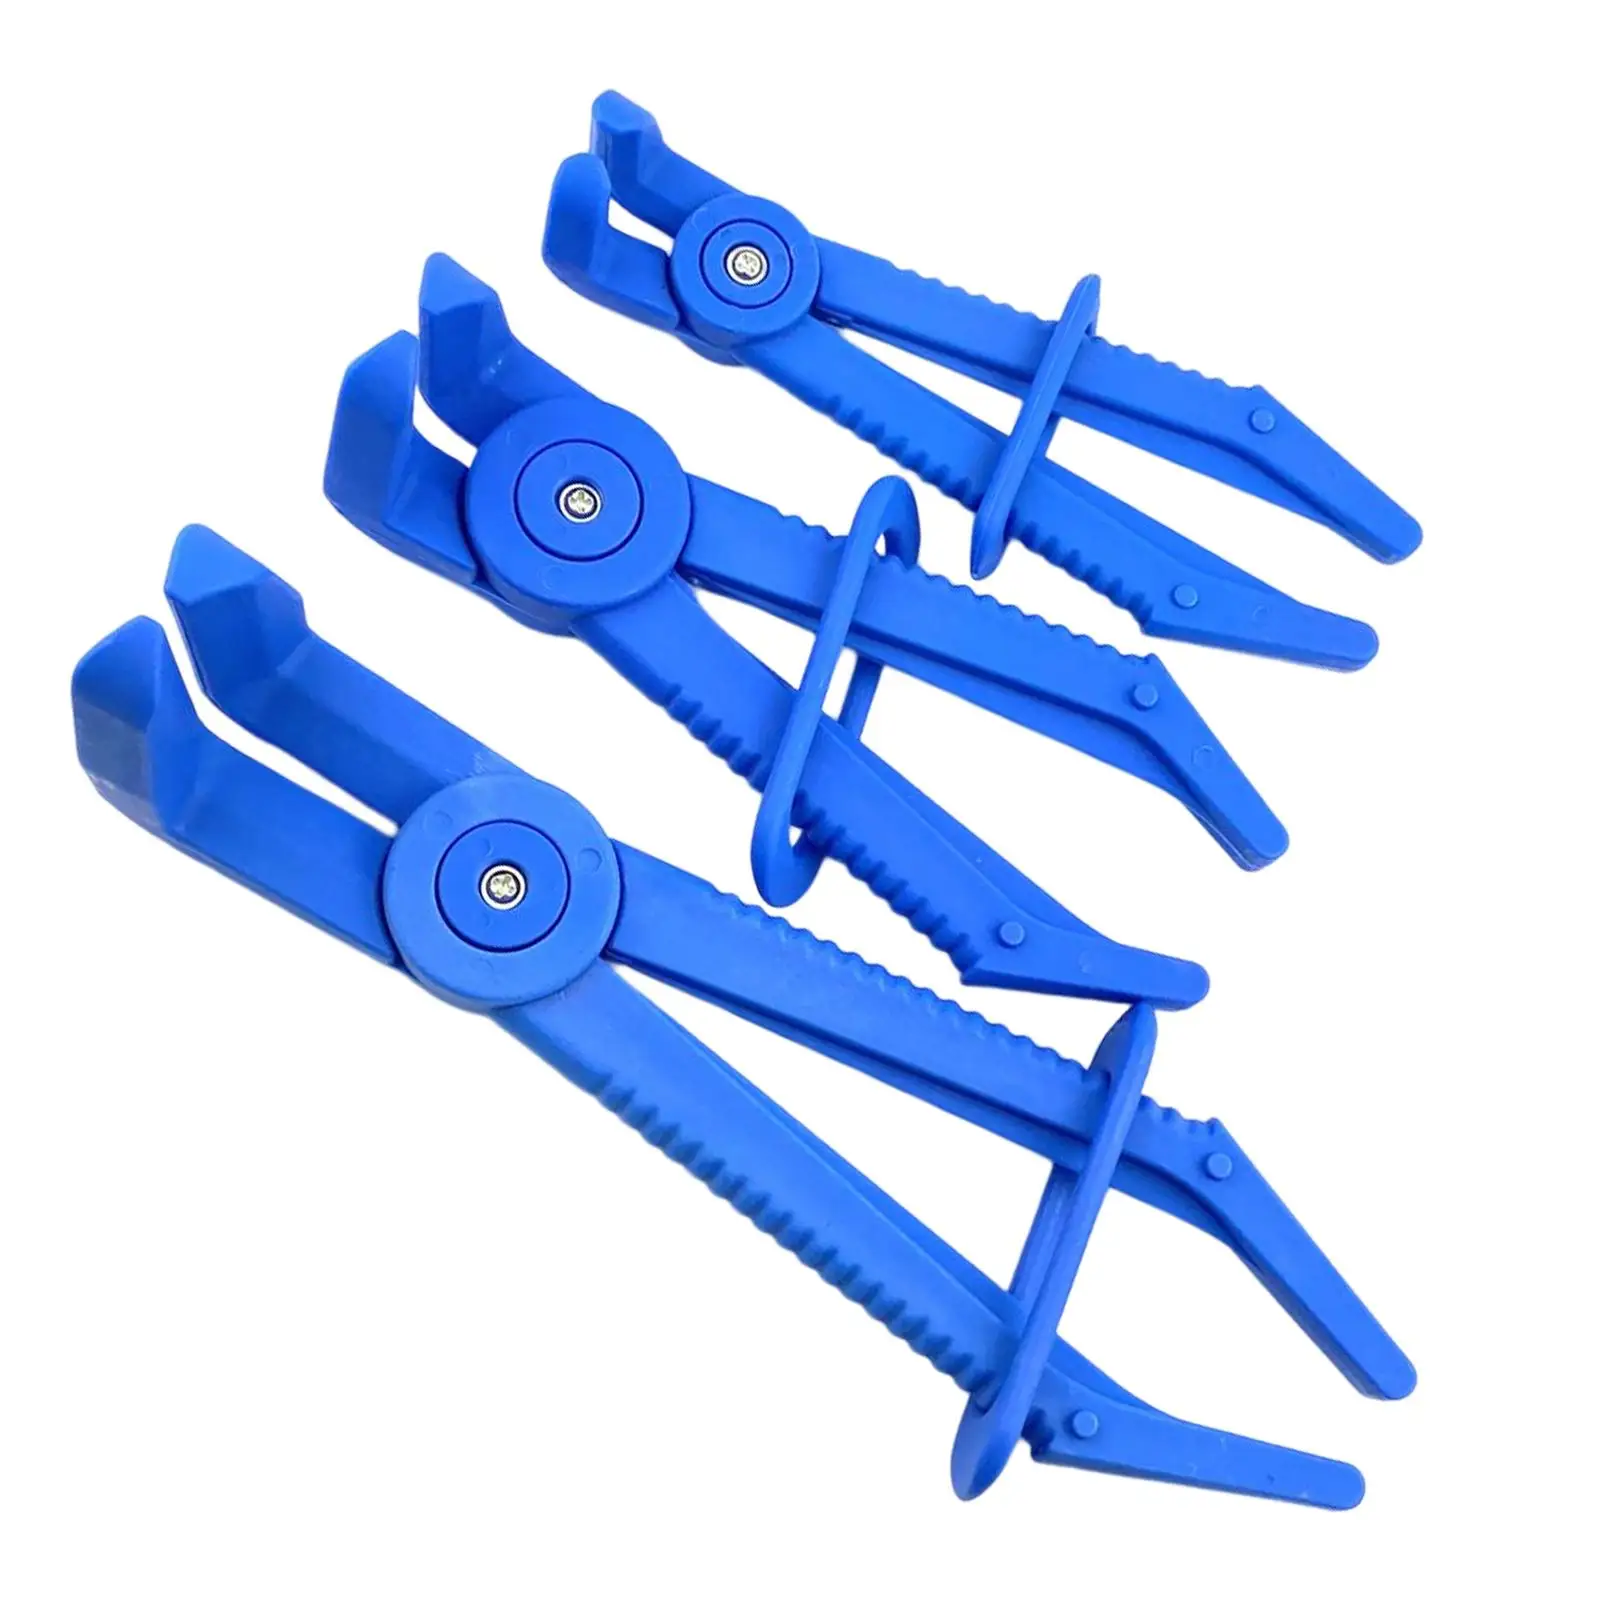 3x Fuel Water Line Hose Pliers Clamp Sealing Clamps Set Fit for Fuel Oil Tube Hose